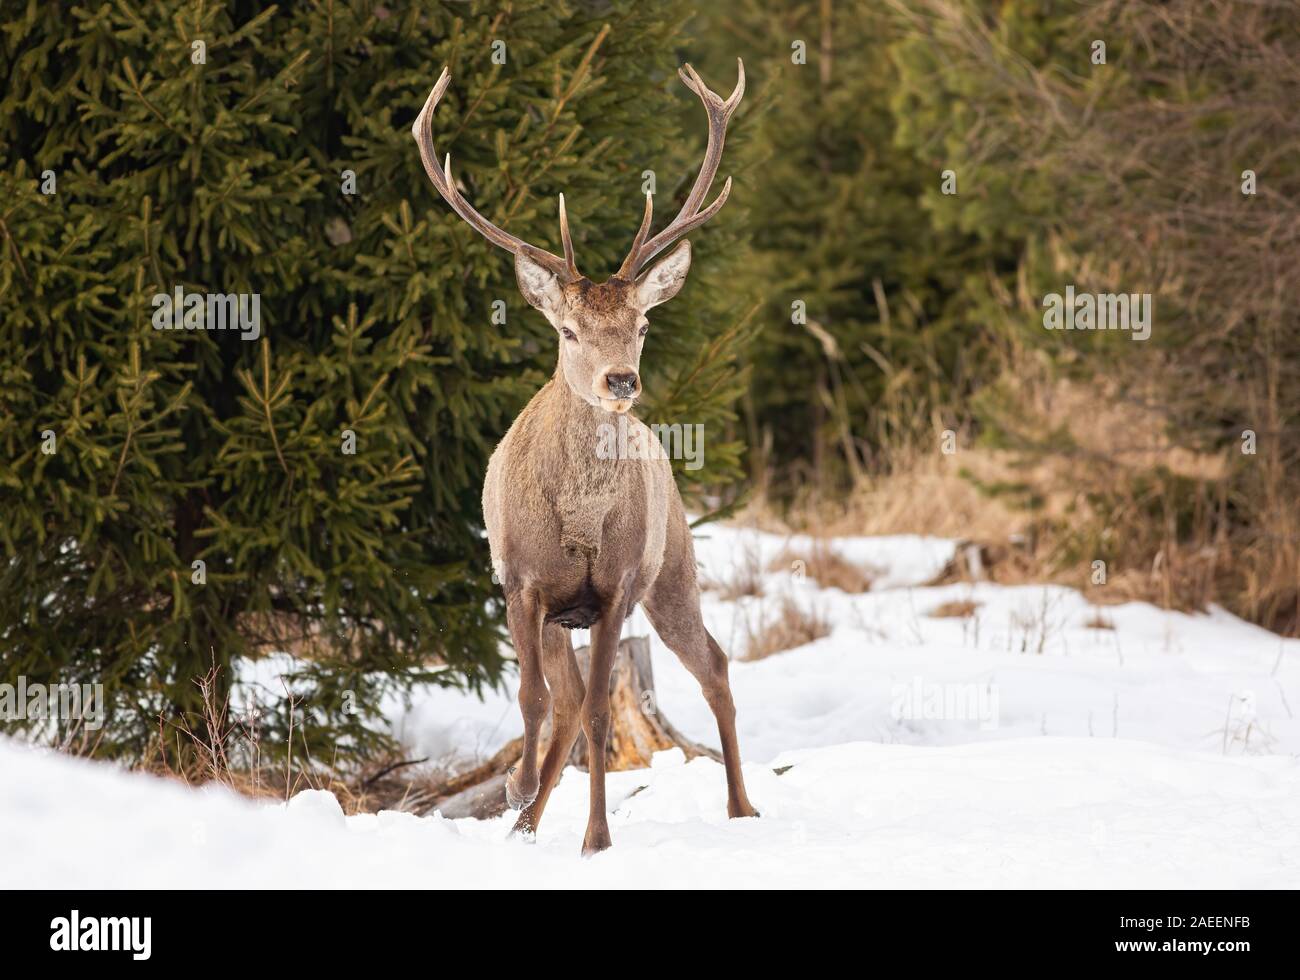 Red deer stag standing on snow with trees behind it Stock Photo